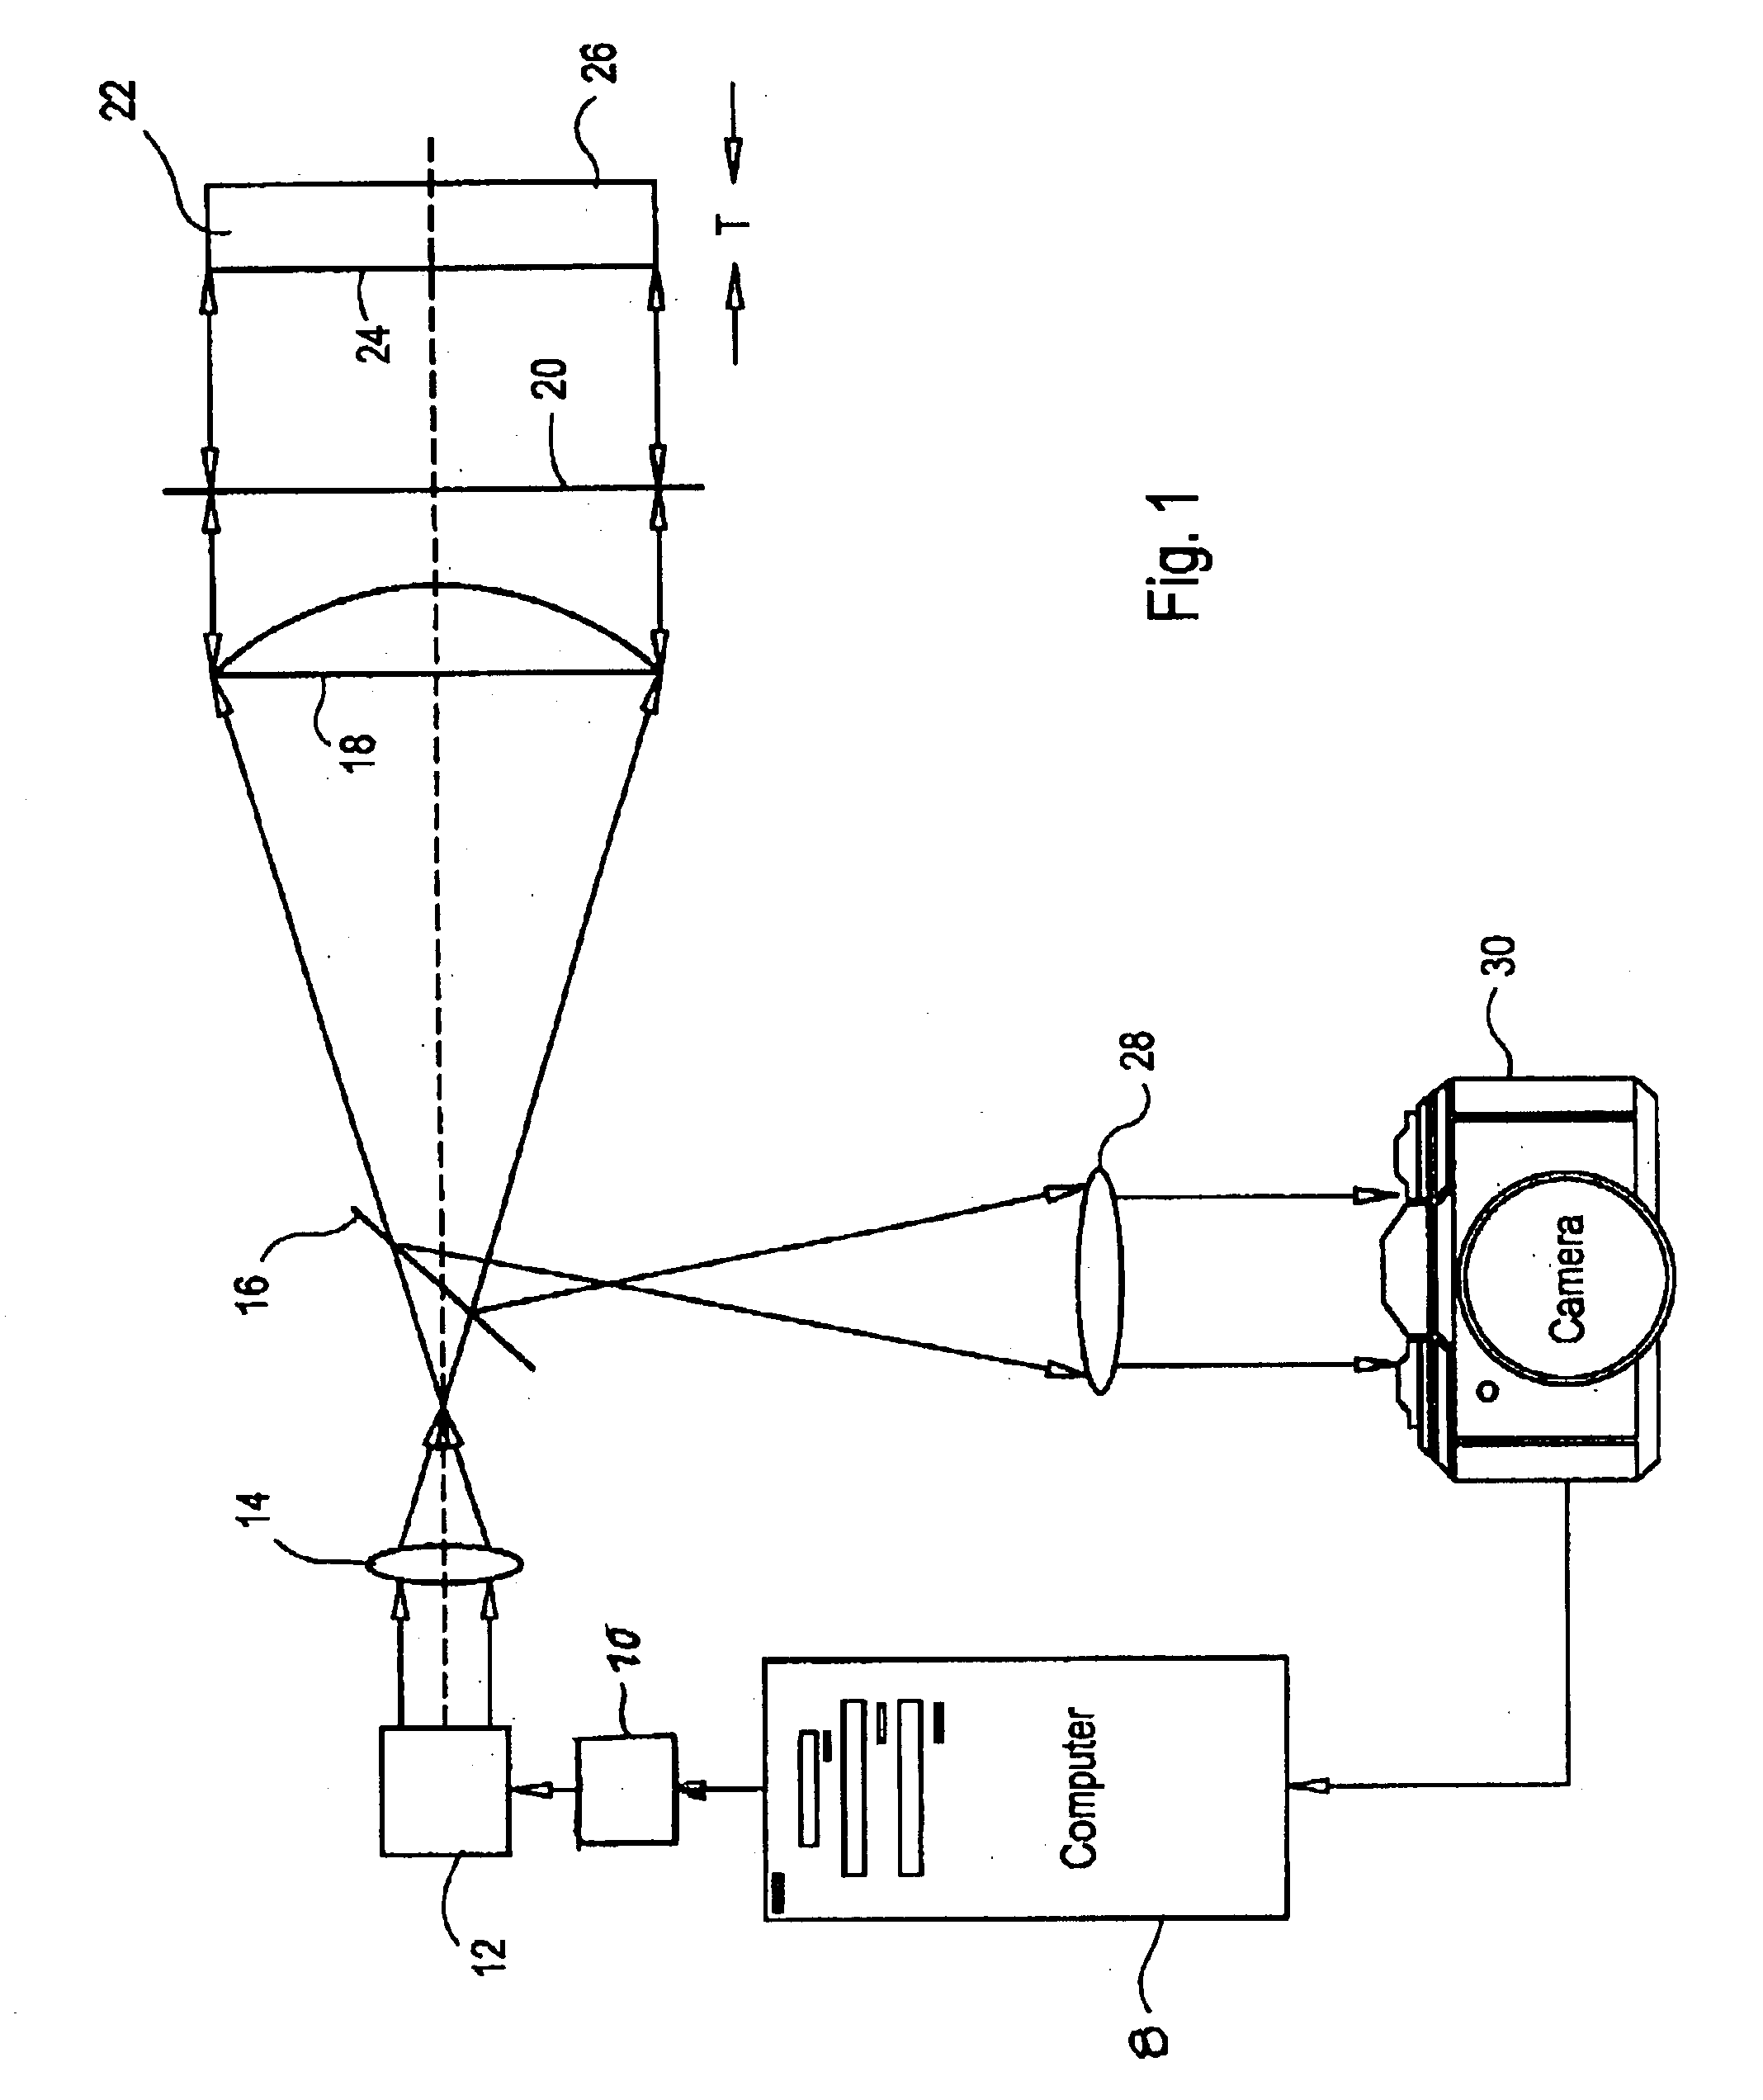 Non linear phase shift calibration for interferometric measurement of multiple surfaces